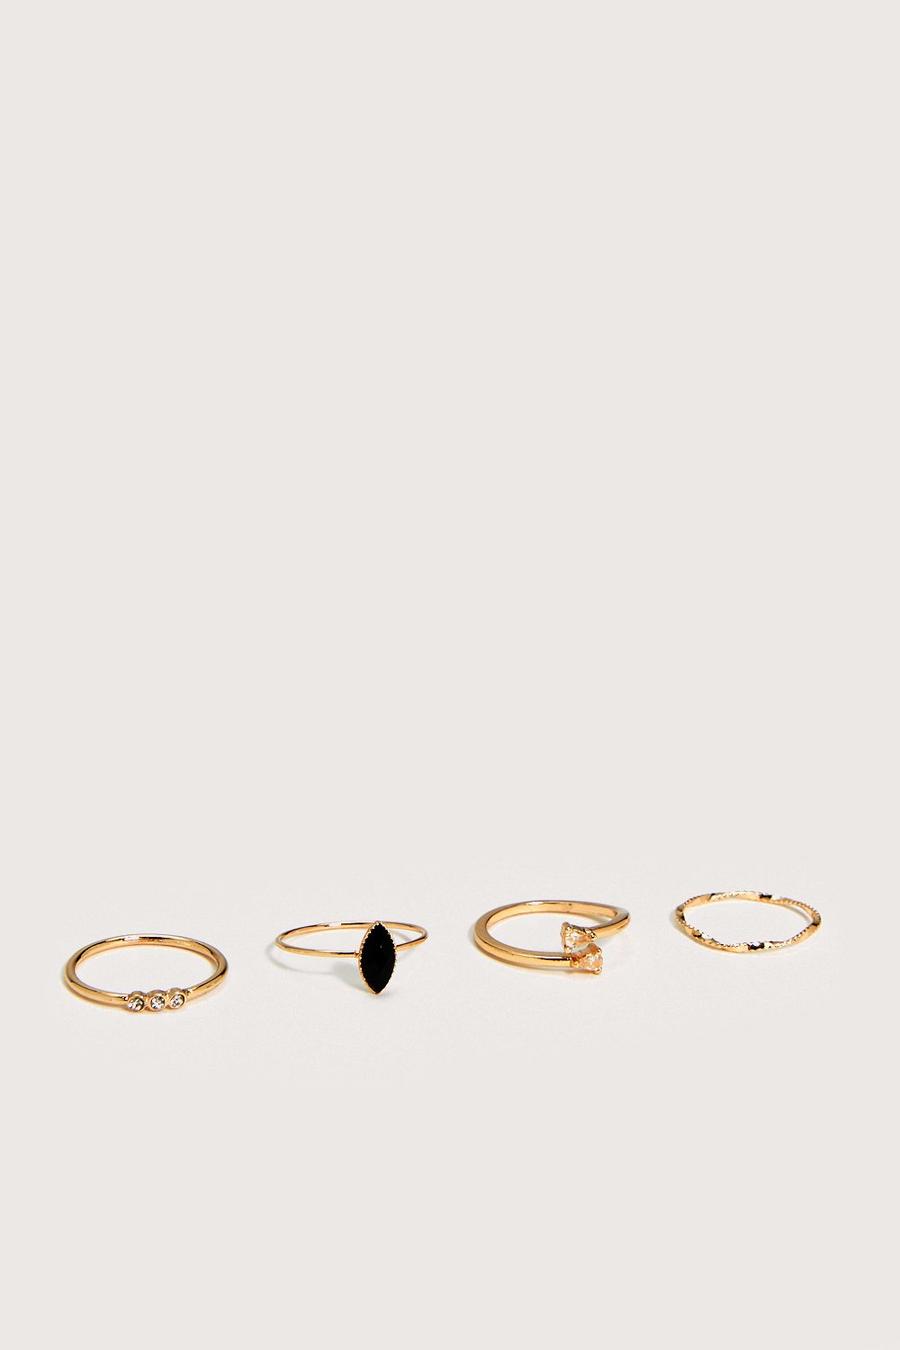 Recycled Metal Diamante Dainty 4 Pc Ring Set